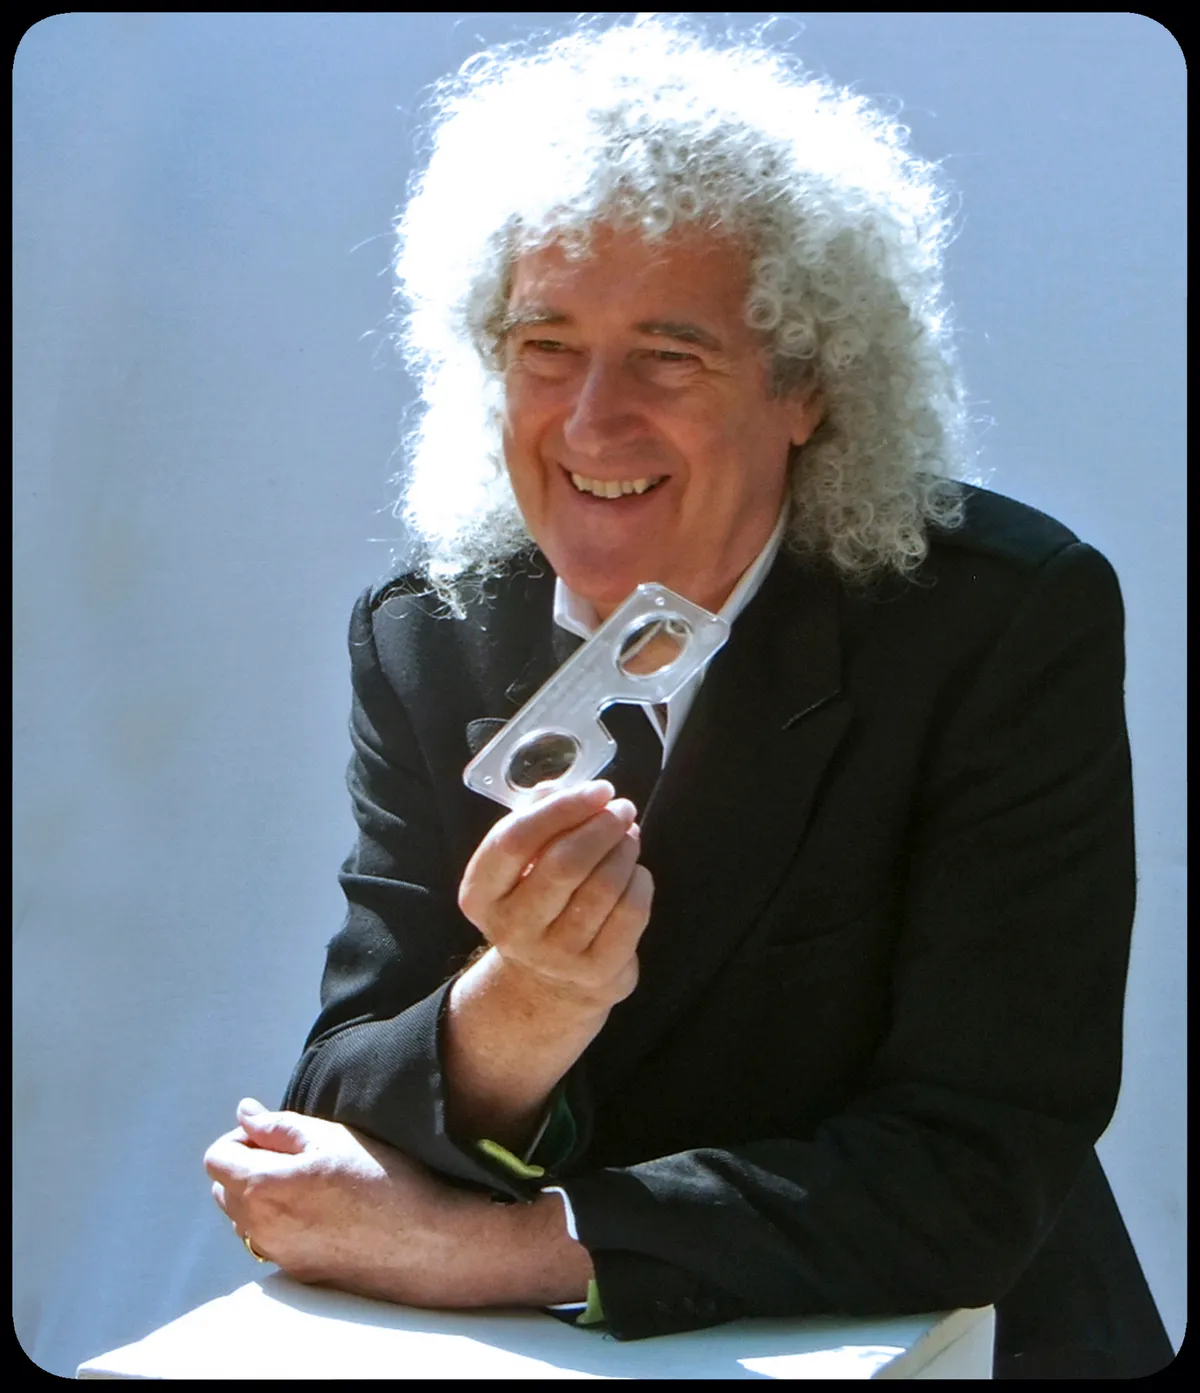 Brian May pictured with the Lite Owl 3D device for use throughout the book.